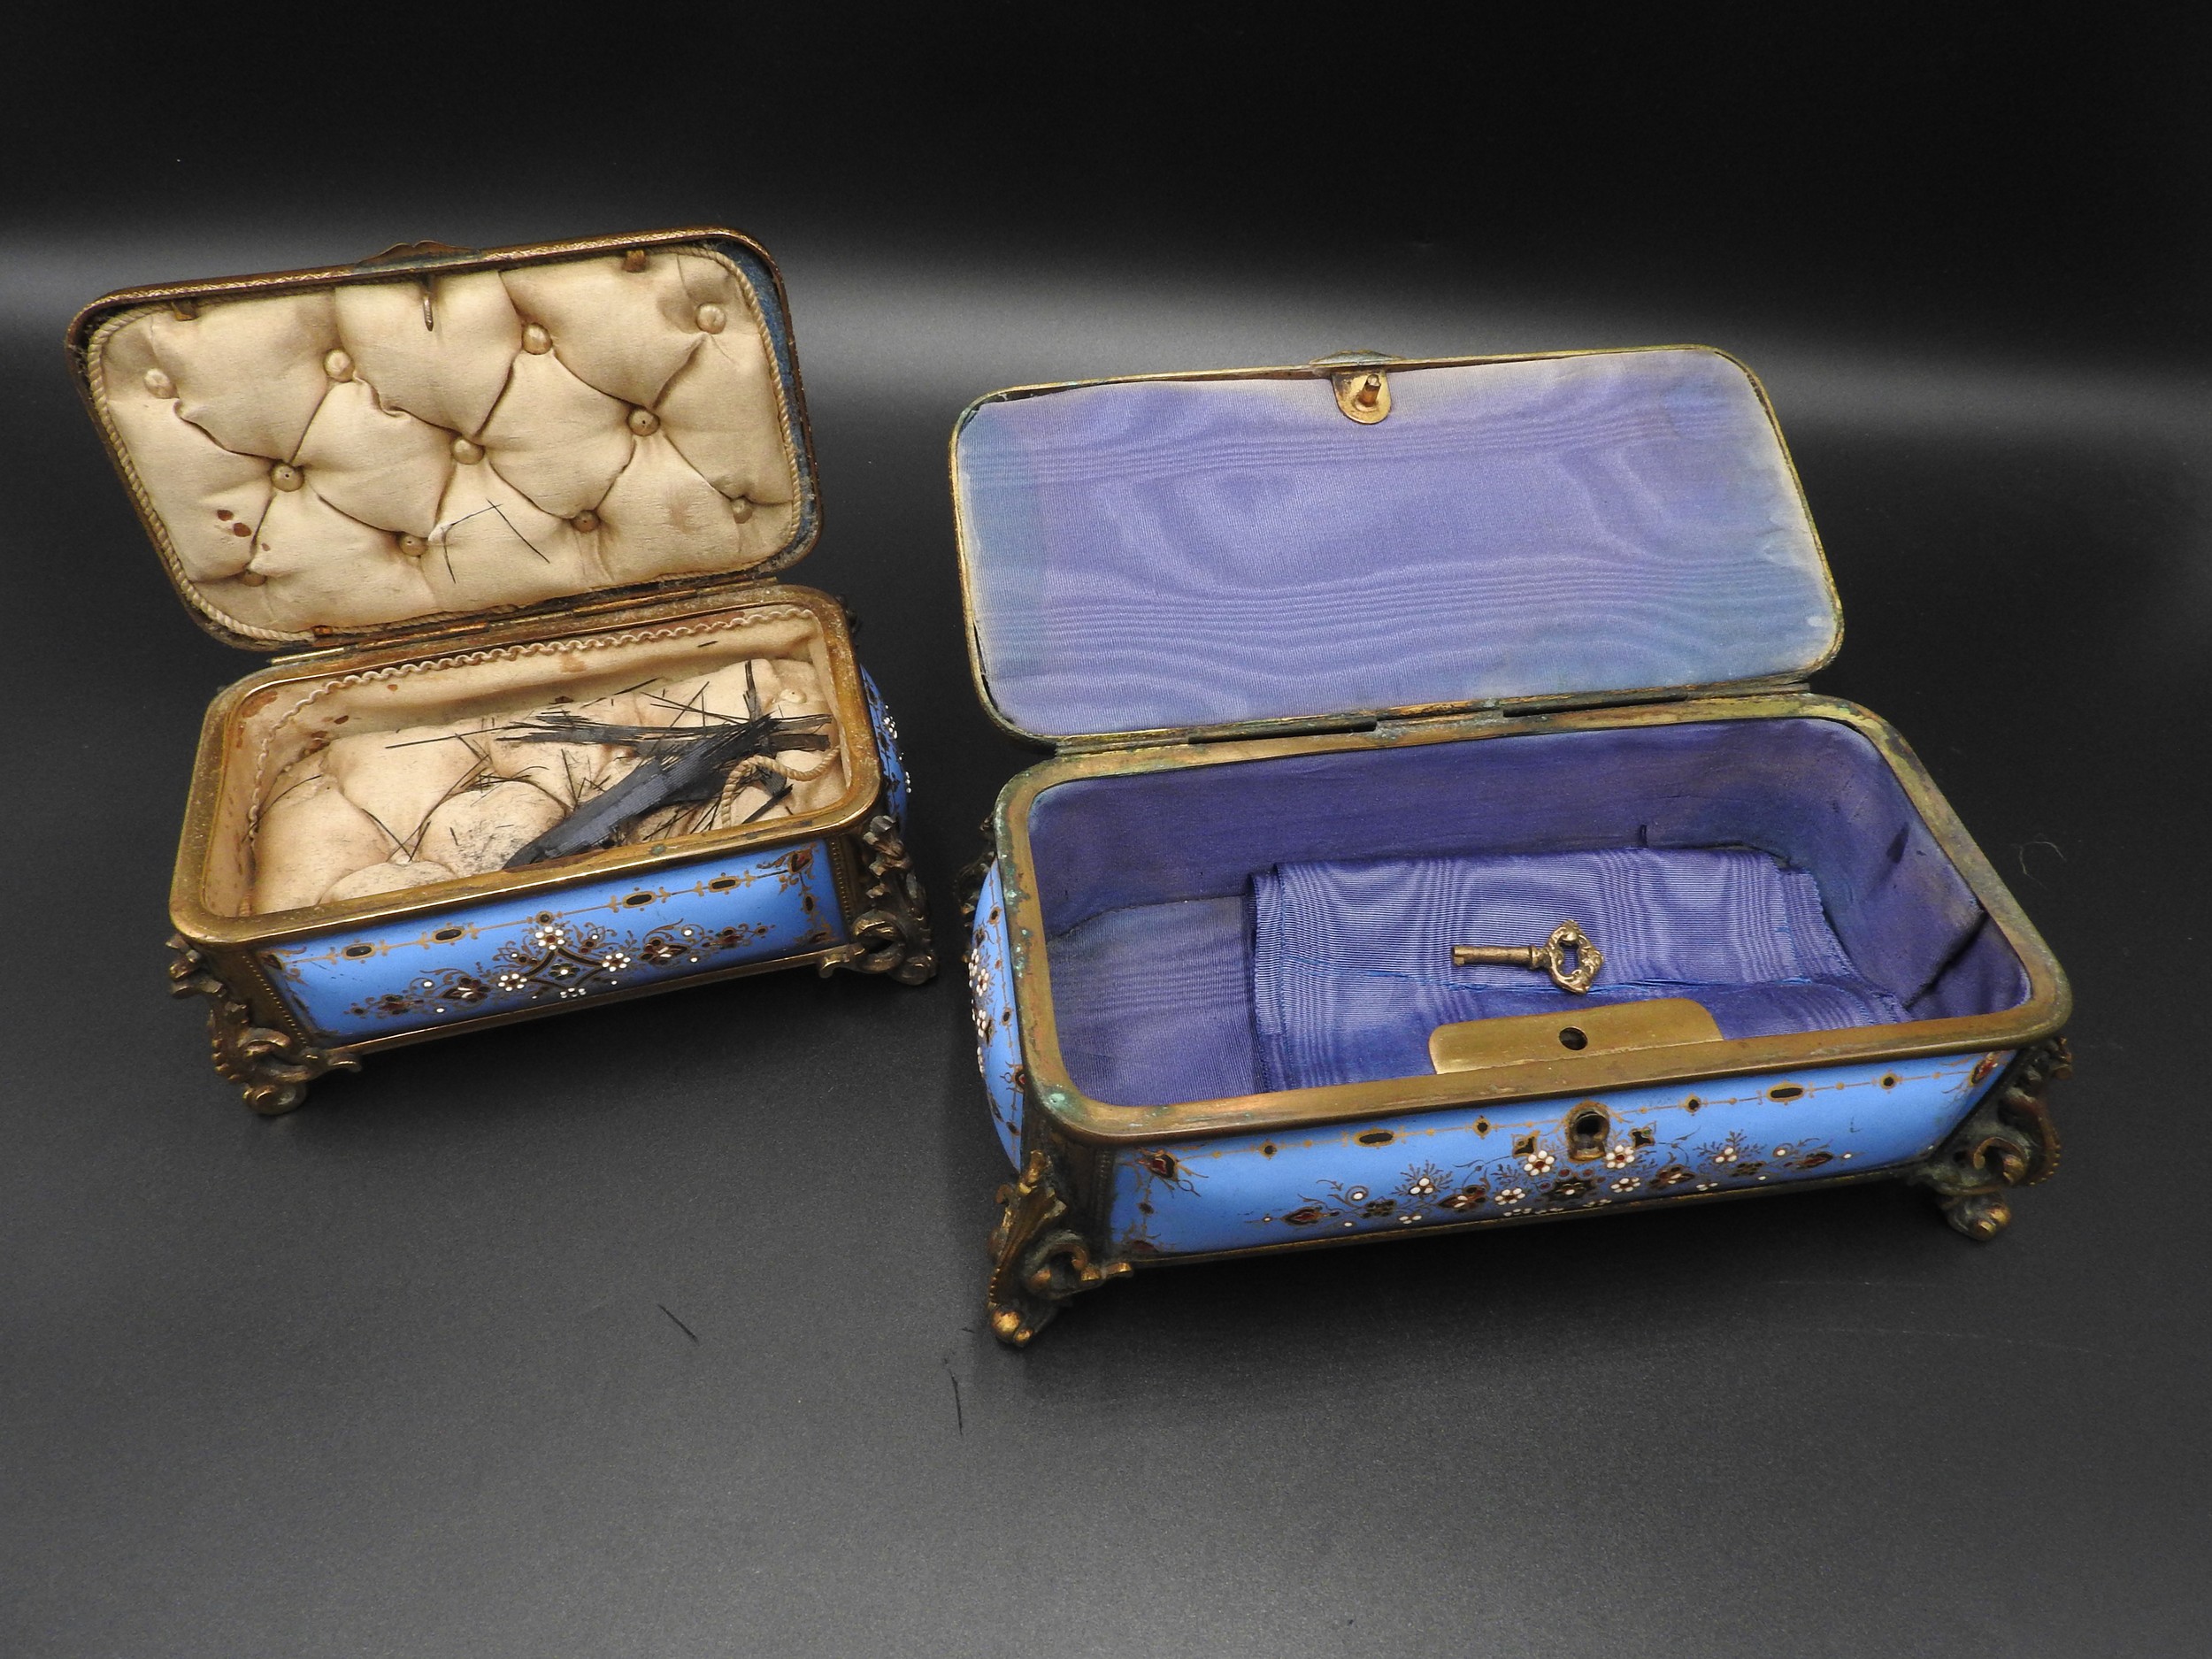 TWO FRENCH LIMOGES ENAMEL BOXES, CIRCA 1900, the blue ground decorated with romantic scenes with - Image 2 of 3